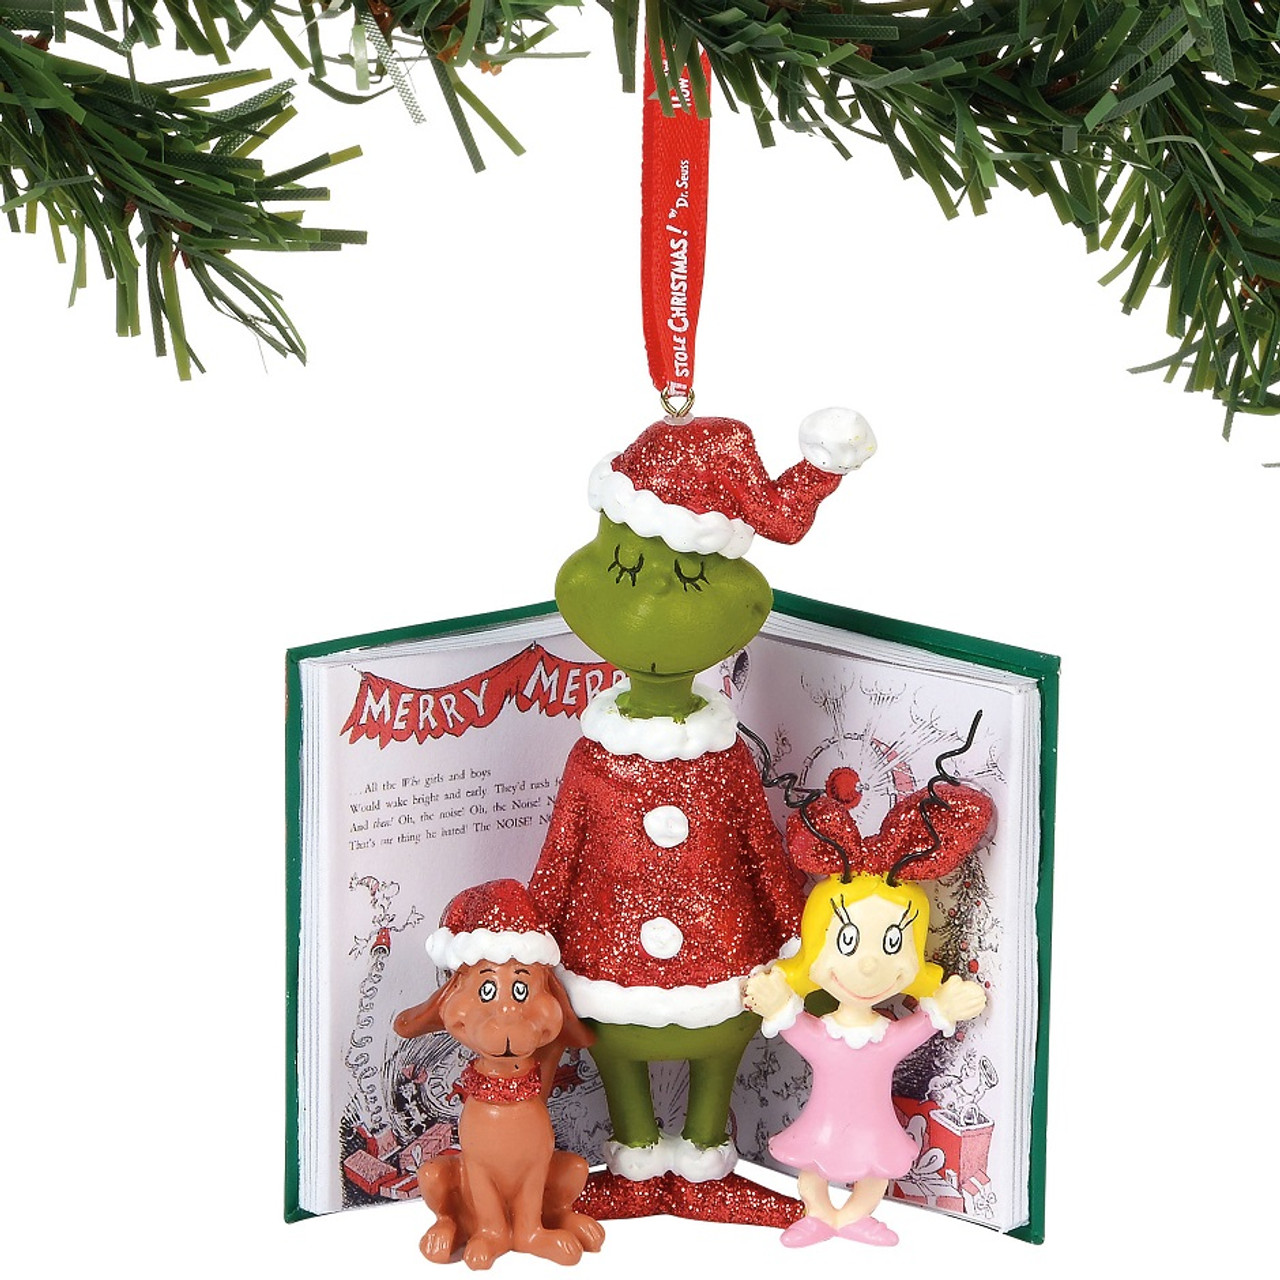 How The Grinch Stole Christmas The Grinch Cindy And Max Book